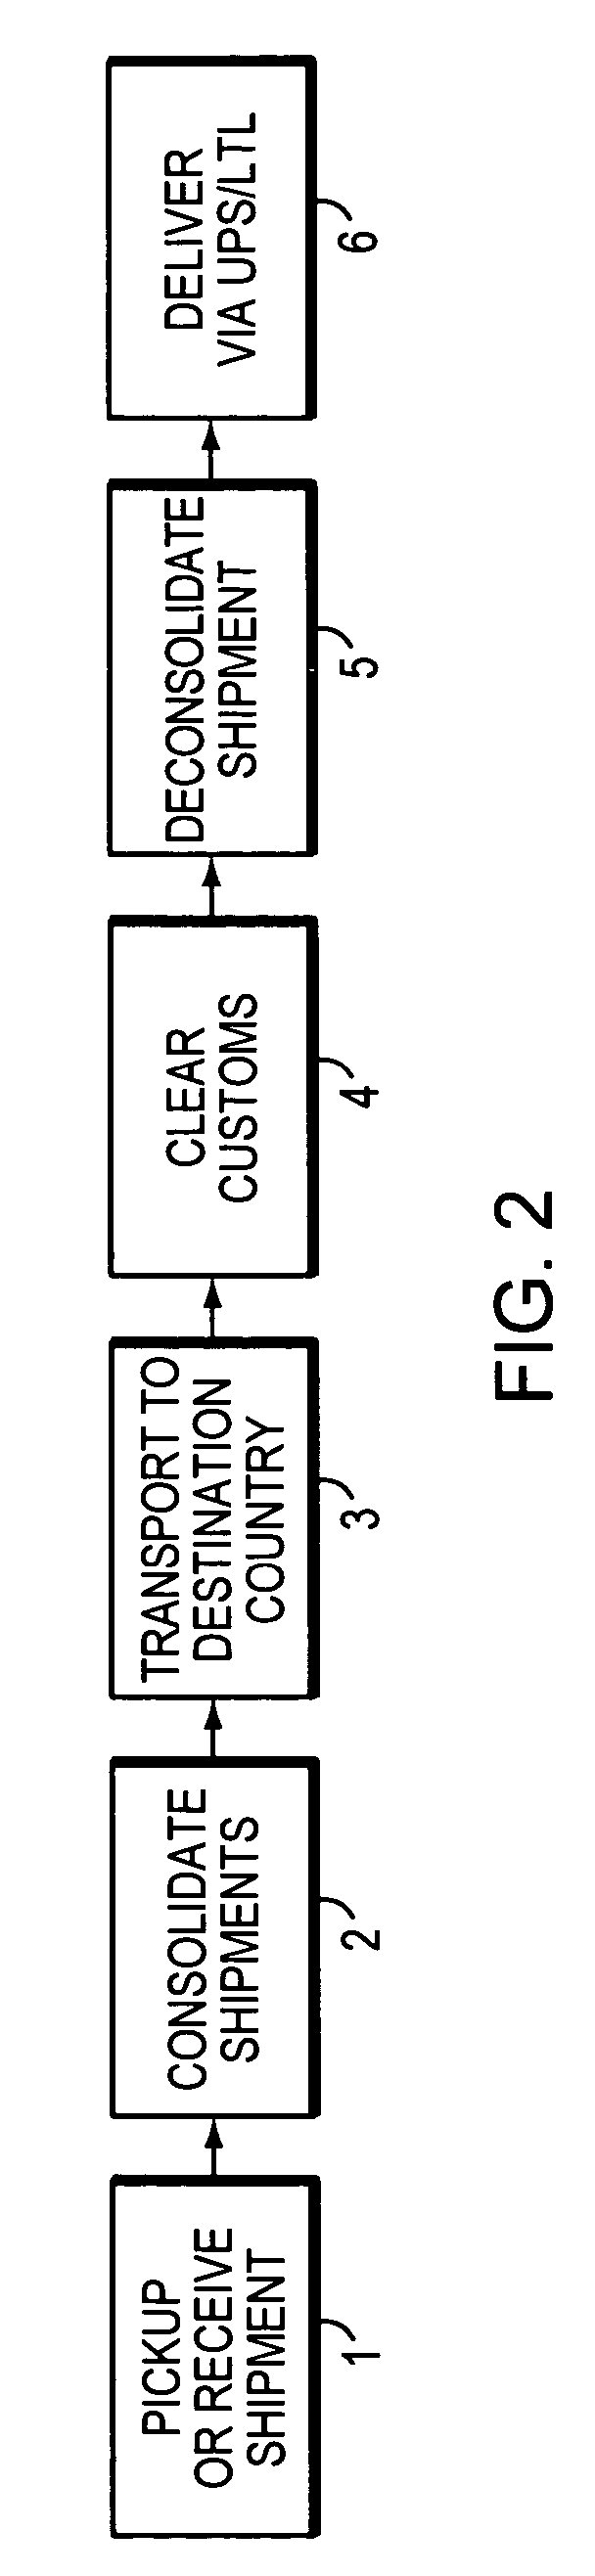 Systems and methods for virtual inventory management